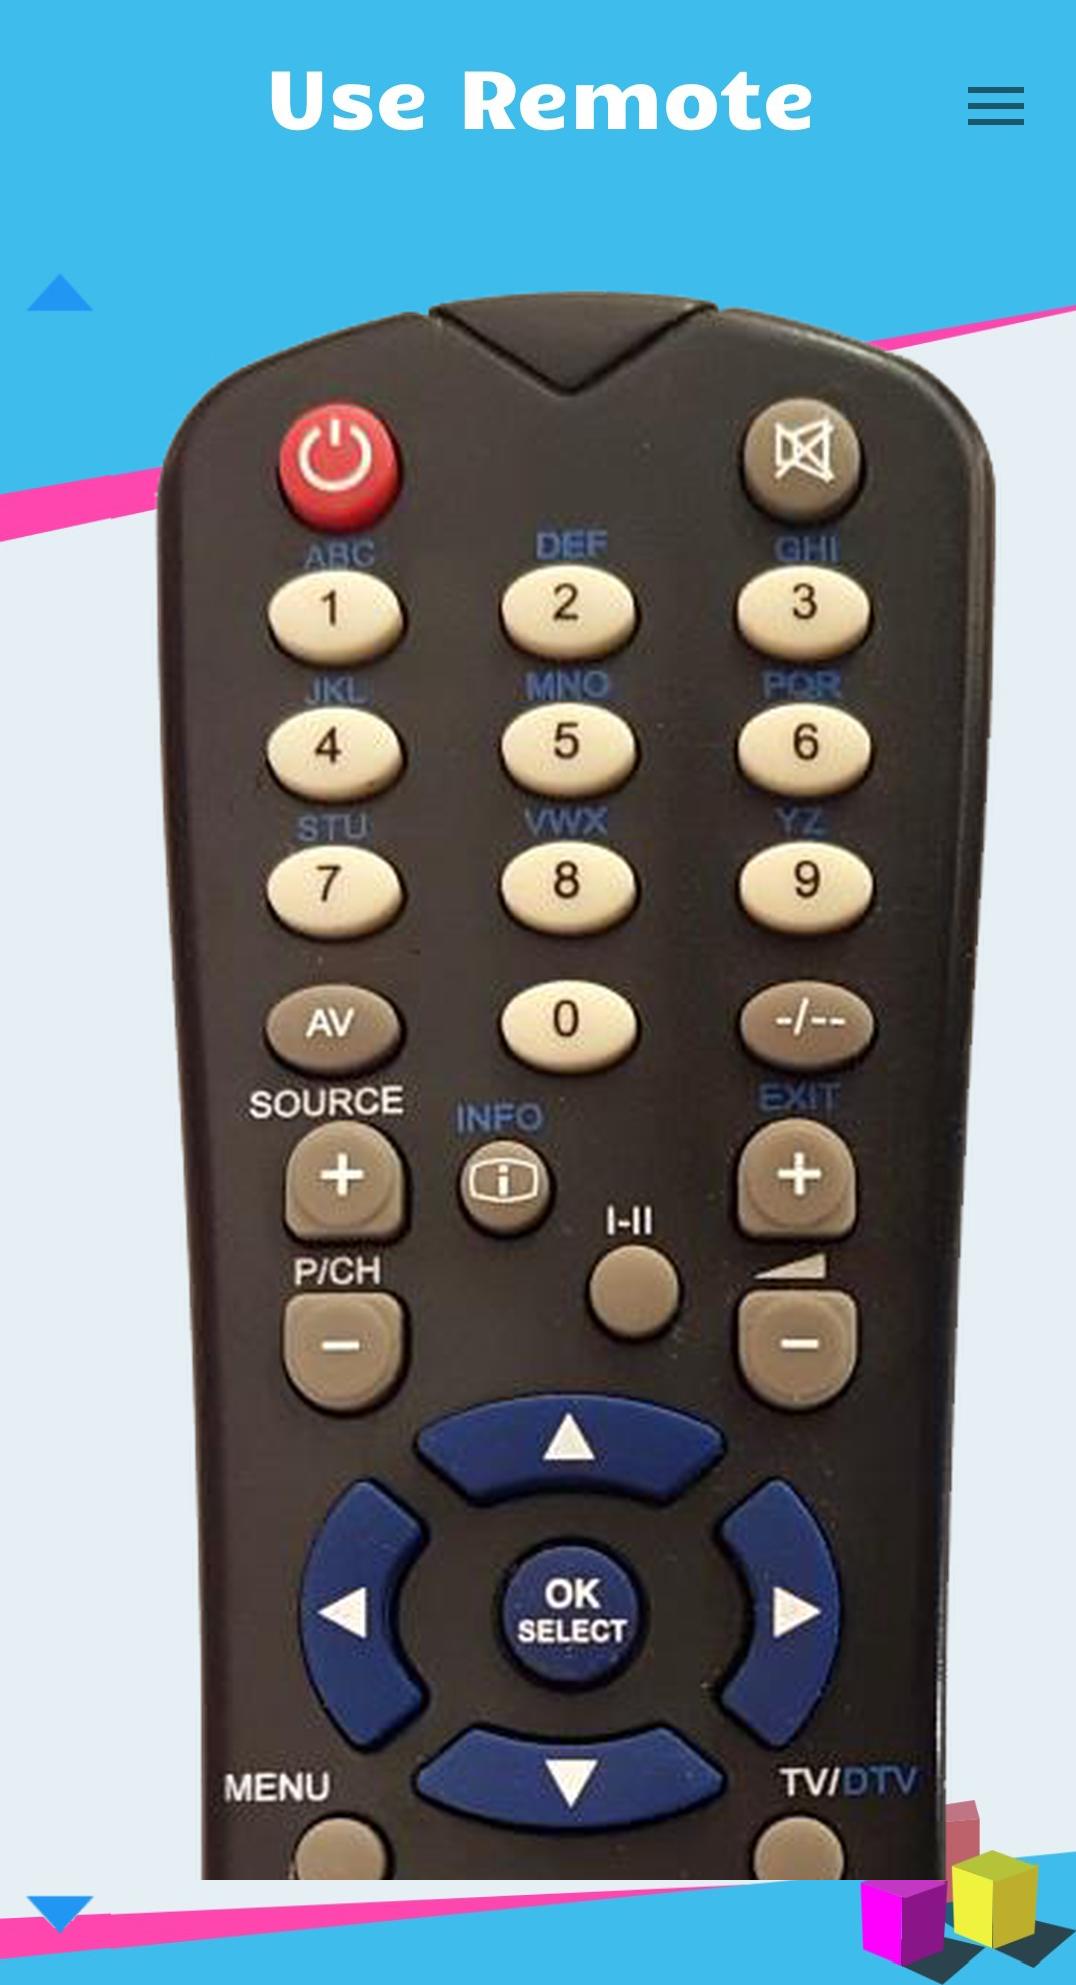 Remote Control for Dantax TV for Android - APK Download